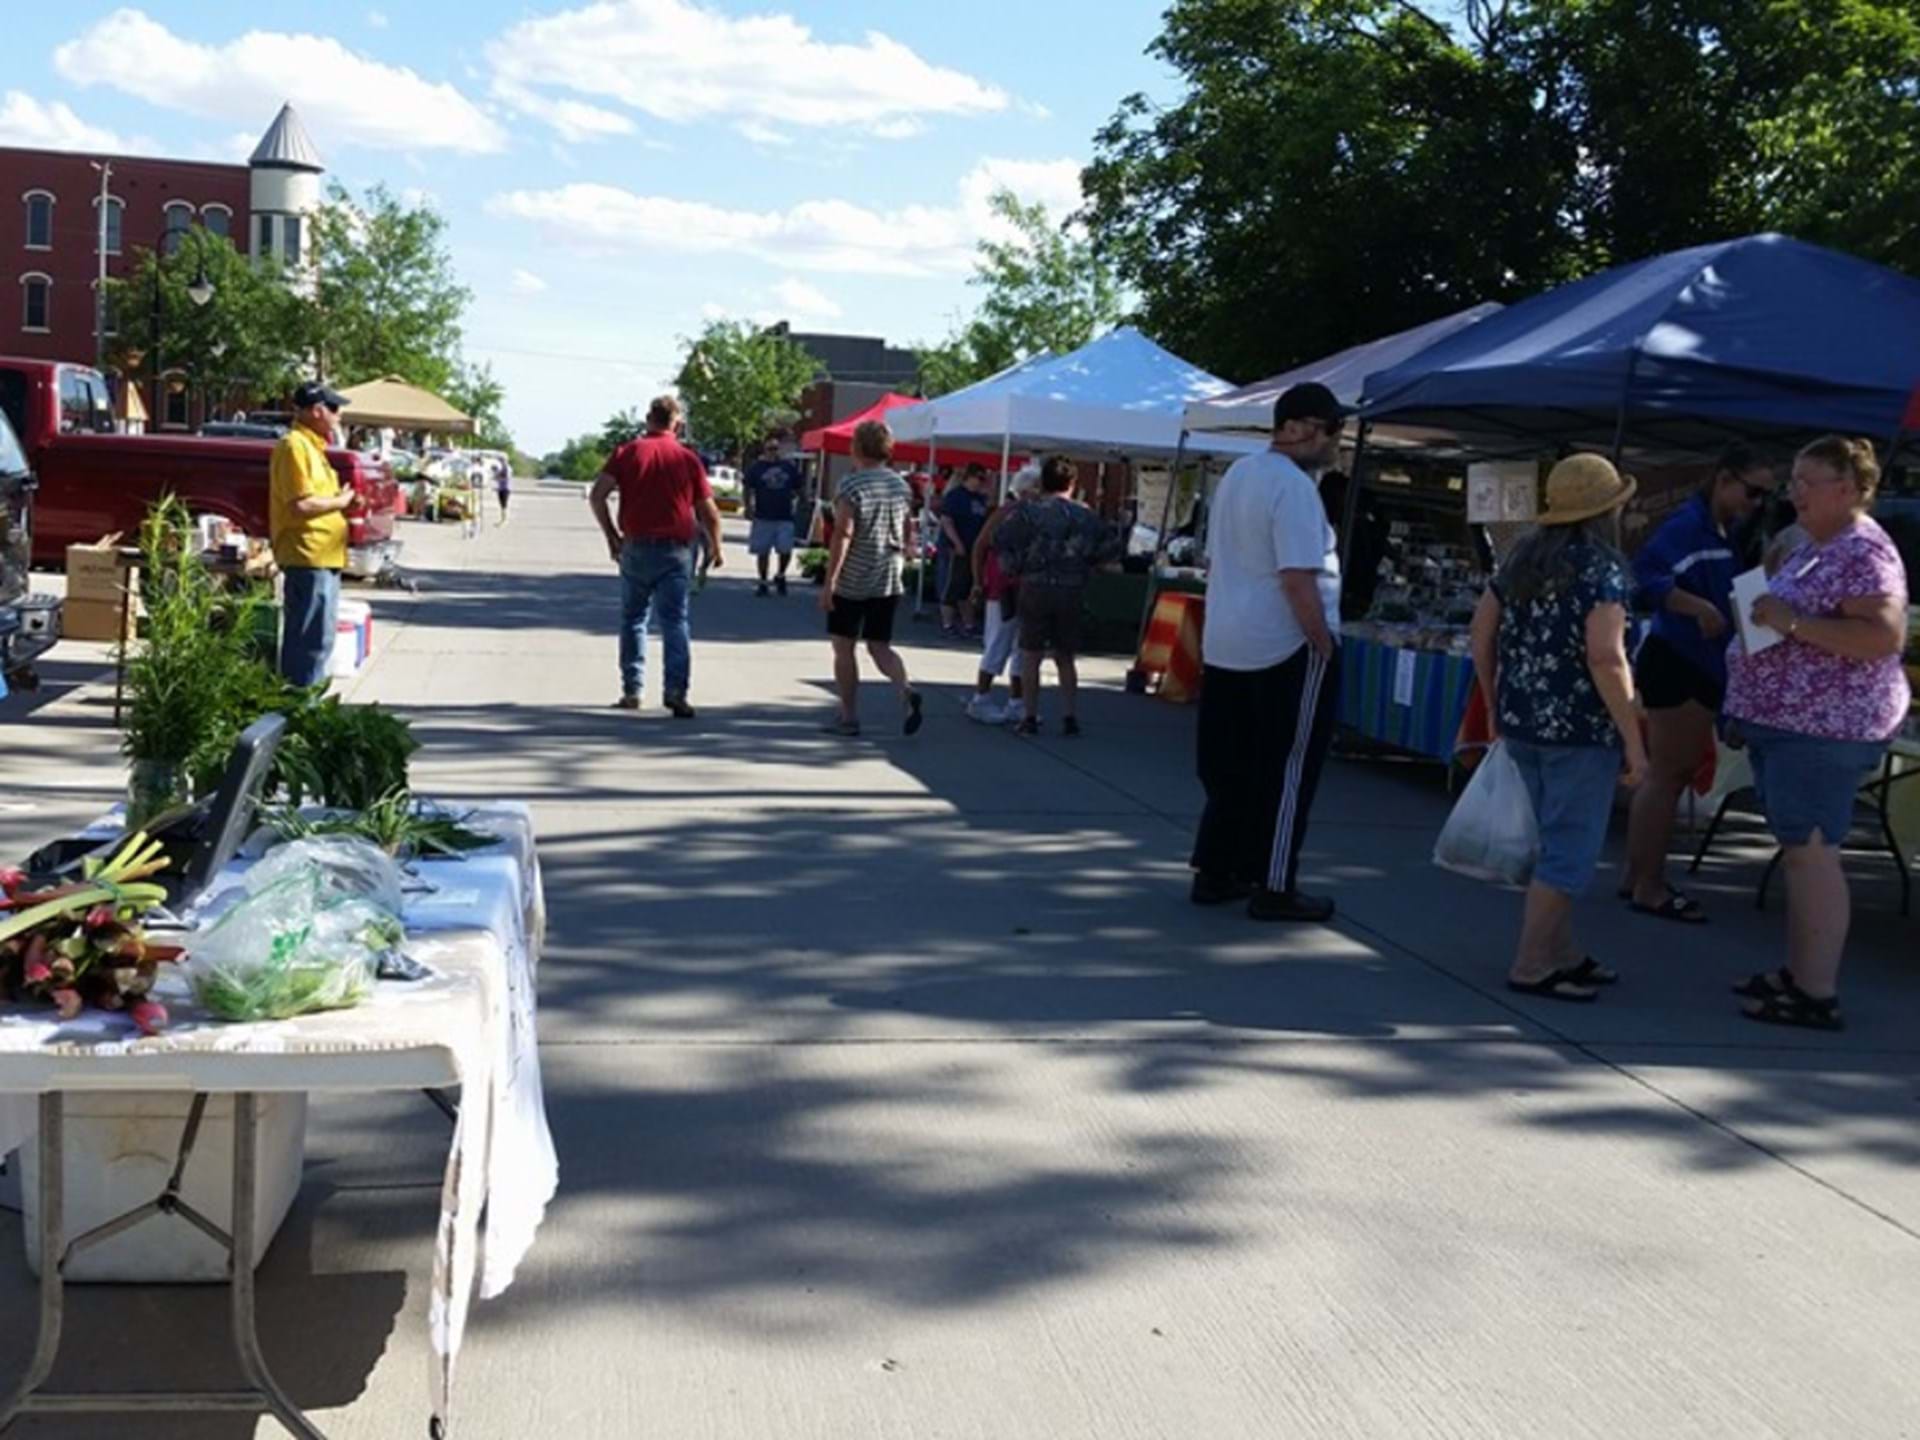 Every Wednesday evening June through September from 5 to 7 p.m. North Elm Street holds the Avoca Main Street Farmers Market, featuring fresh local produce, baked goods, crafts, food trucks, and entertainment.